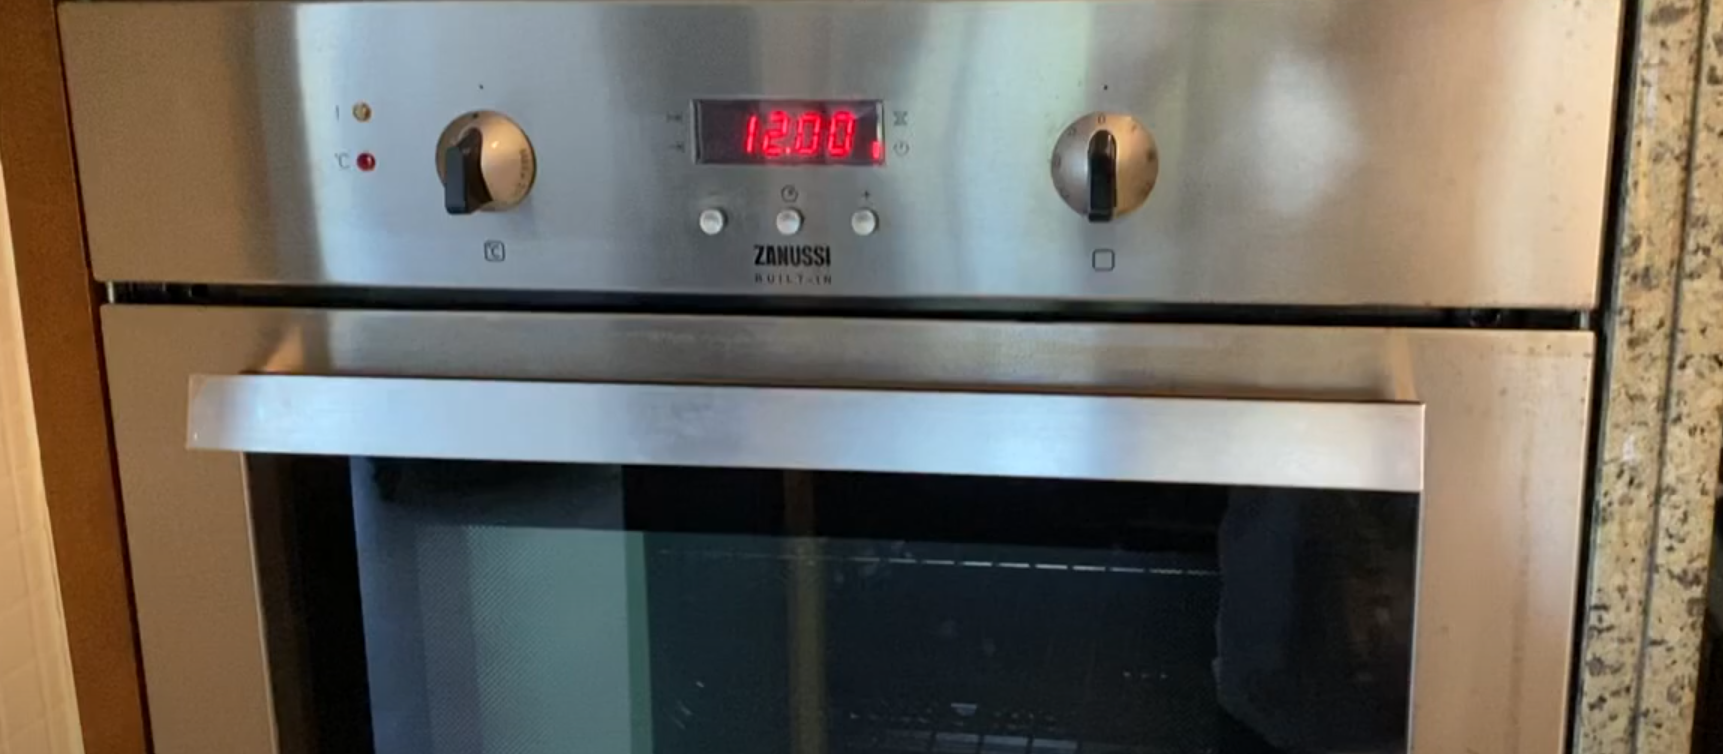 Zanussi Oven control panel and in use